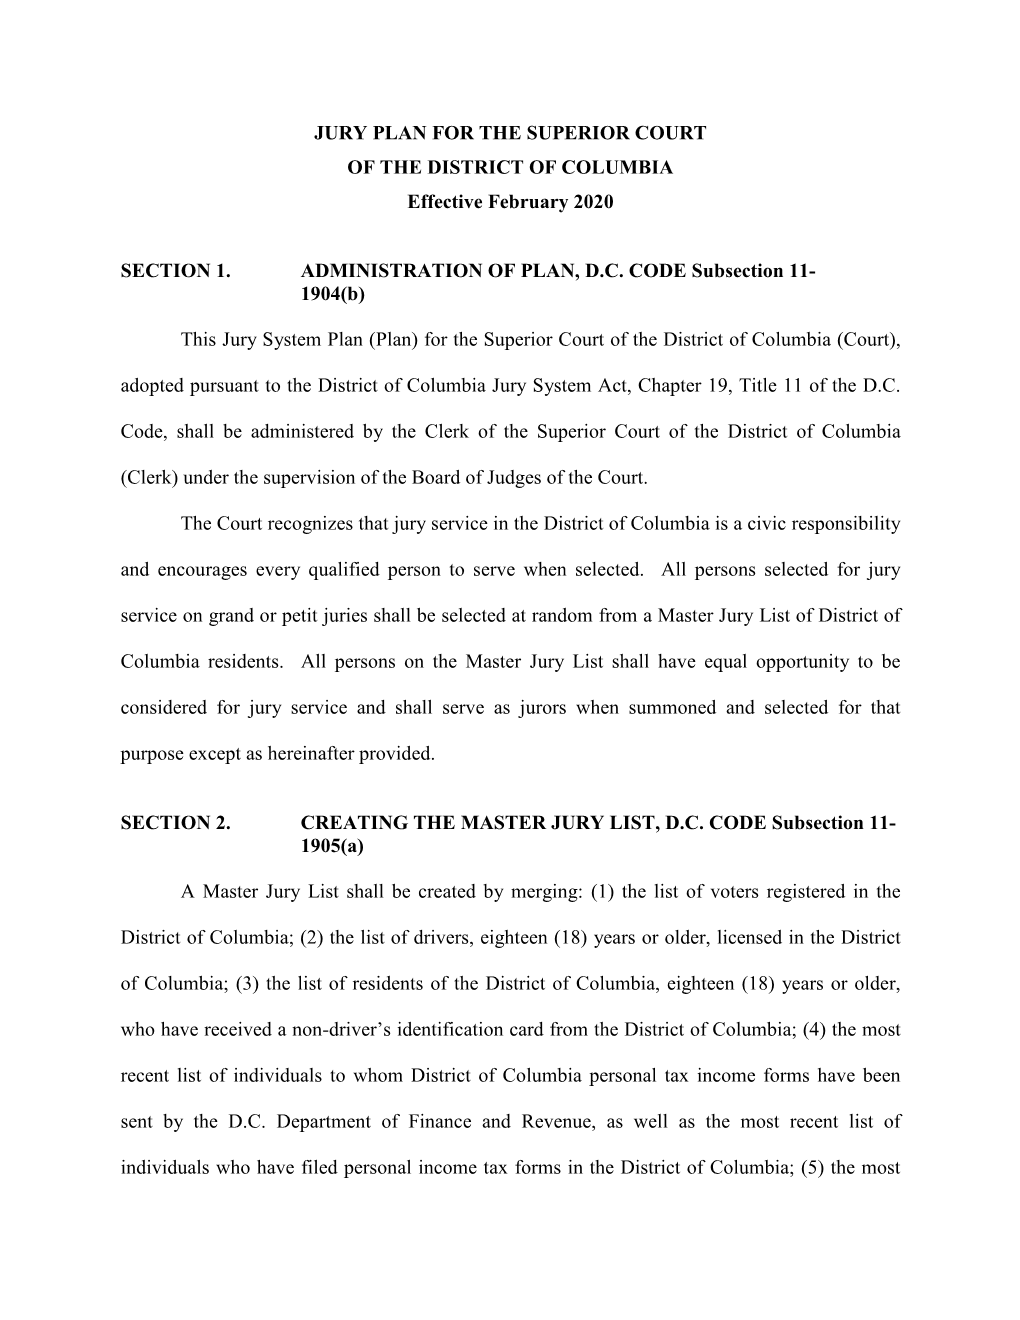 JURY PLAN for the SUPERIOR COURT of the DISTRICT of COLUMBIA Effective February 2020 SECTION 1. ADMINISTRATION of PLAN, D.C. CO